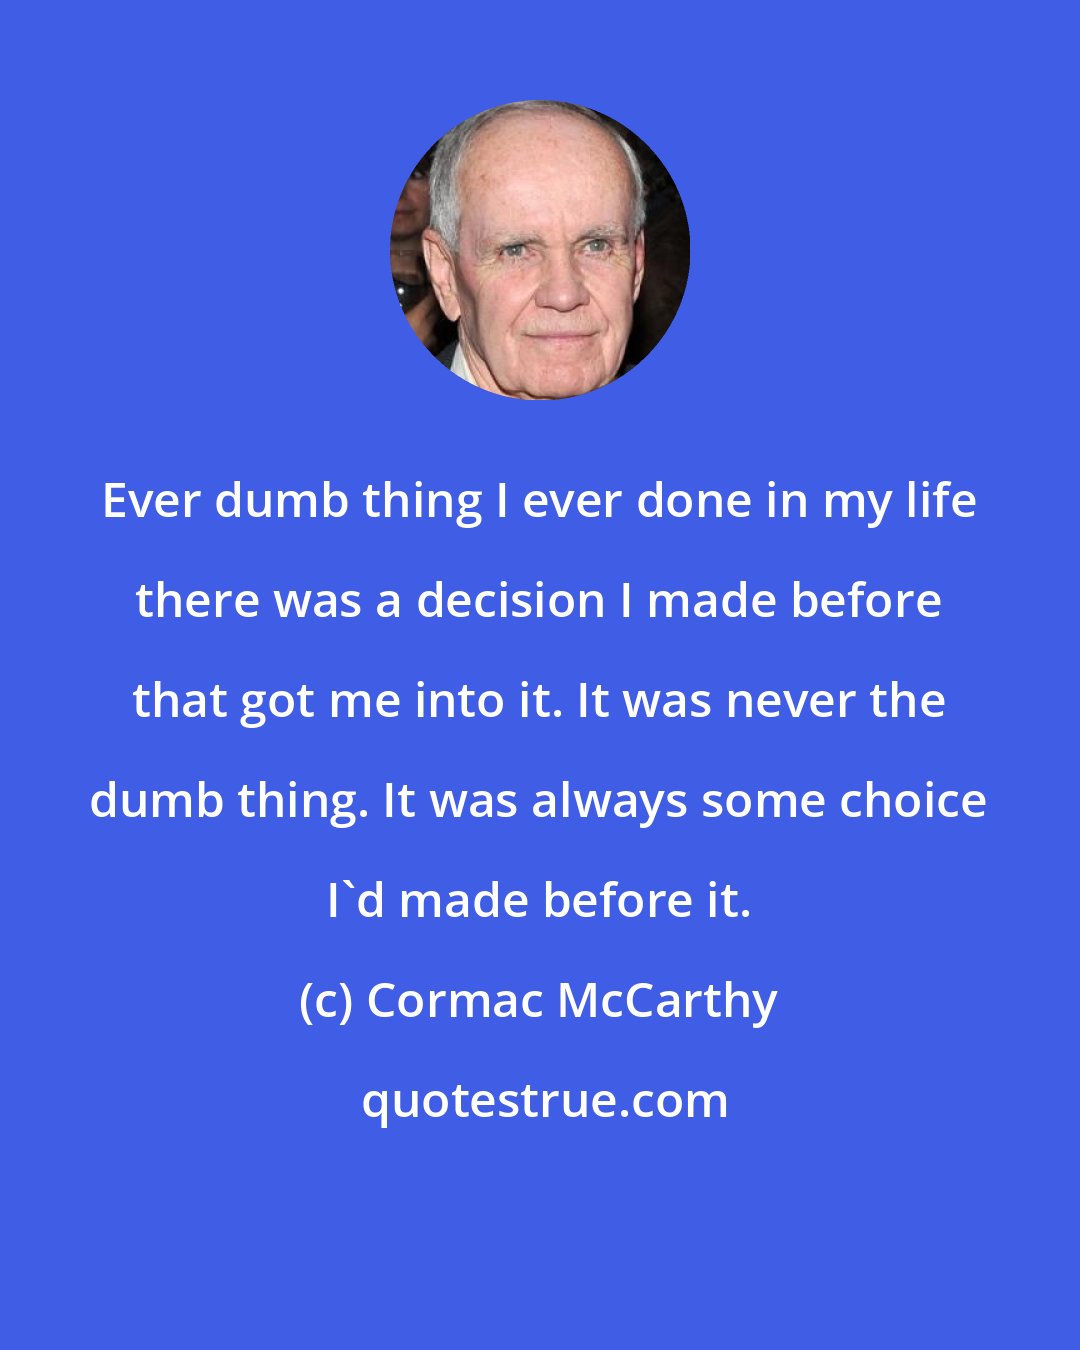 Cormac McCarthy: Ever dumb thing I ever done in my life there was a decision I made before that got me into it. It was never the dumb thing. It was always some choice I'd made before it.